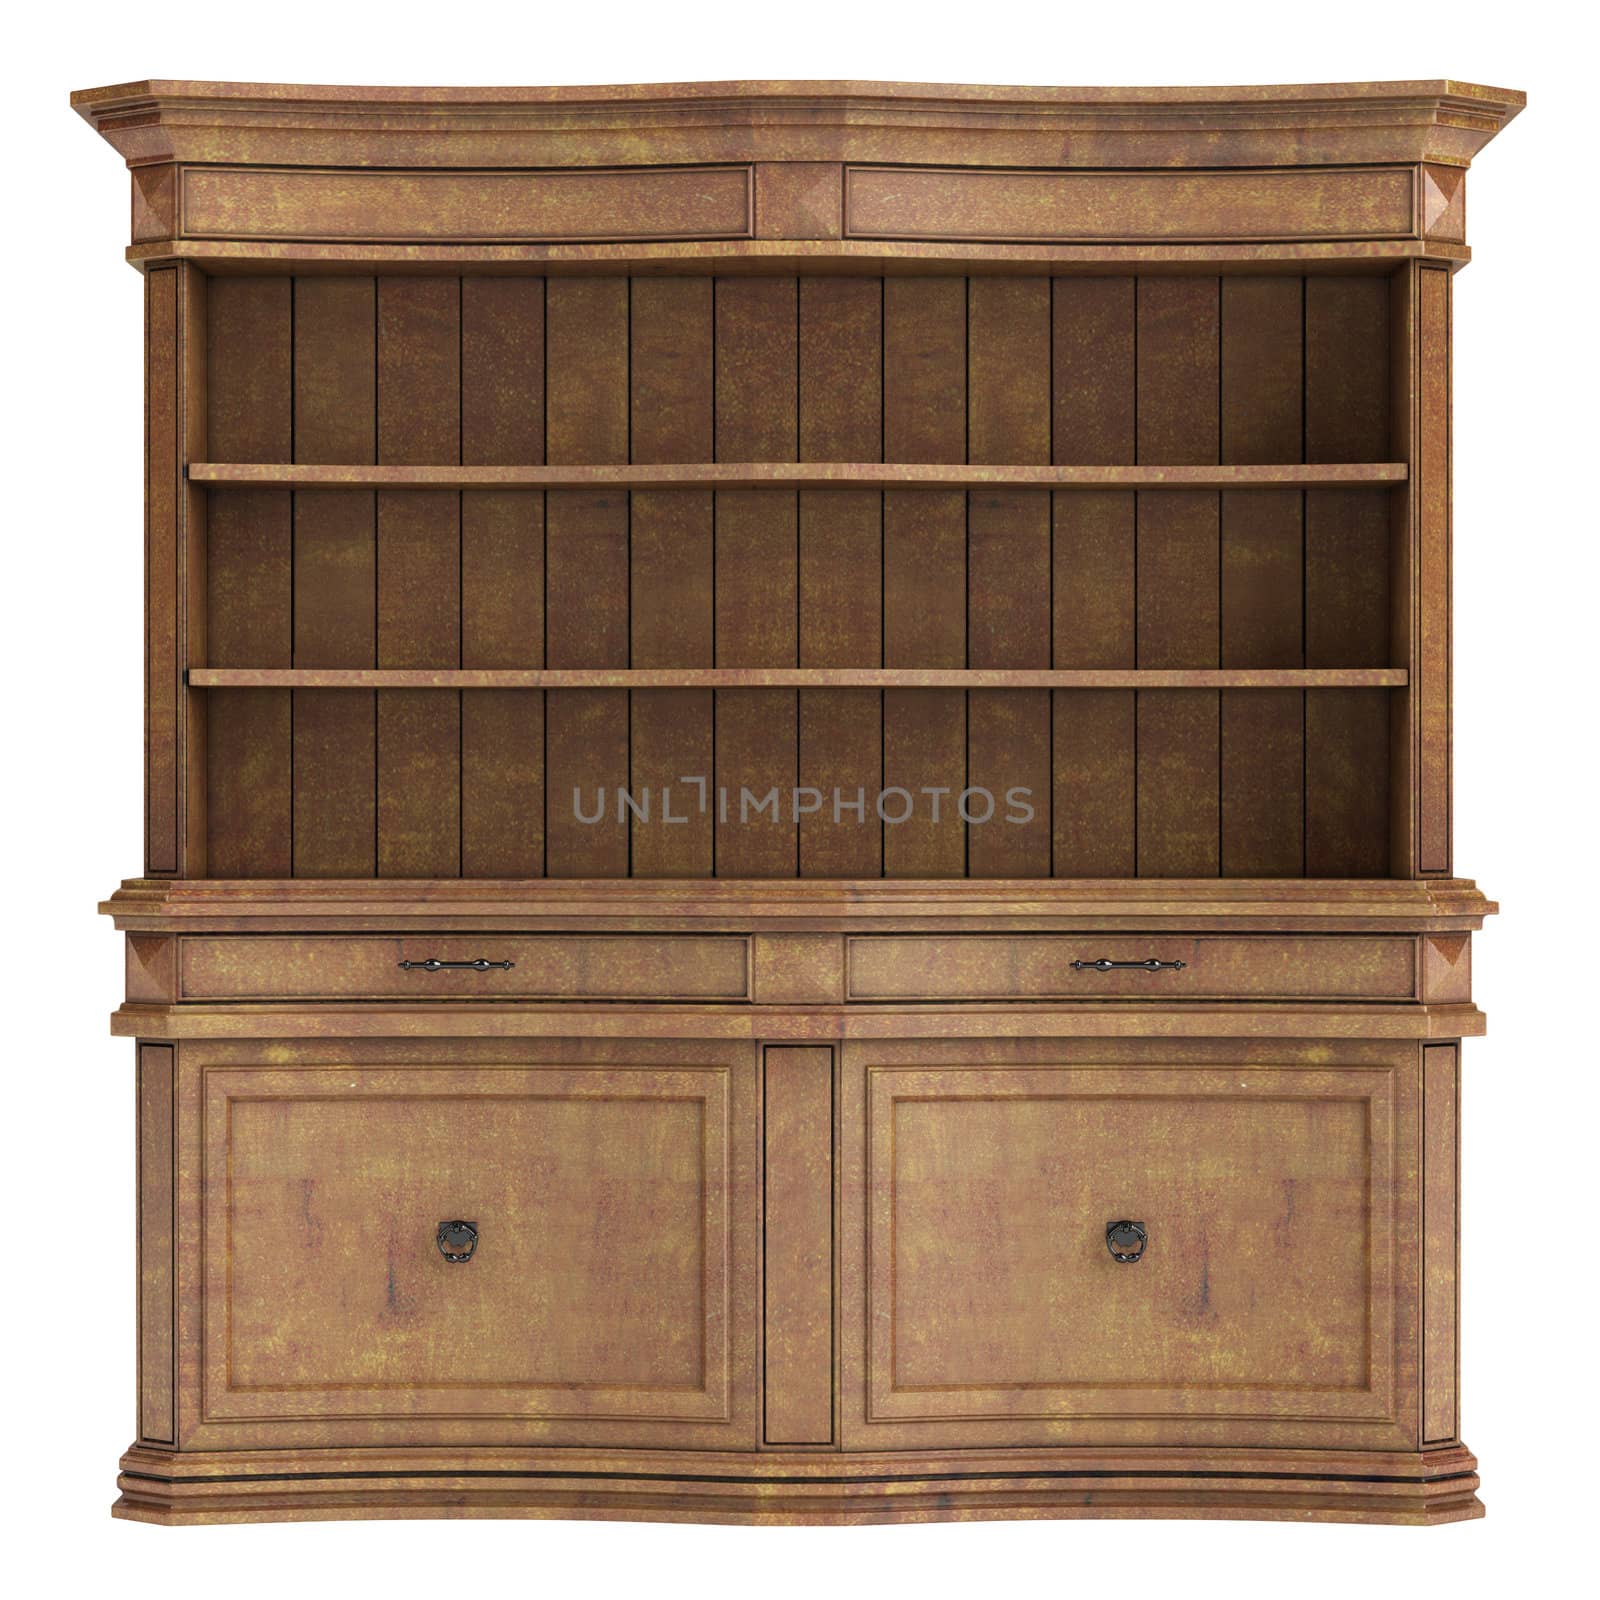 Antique wooden cabinet isolated on white background